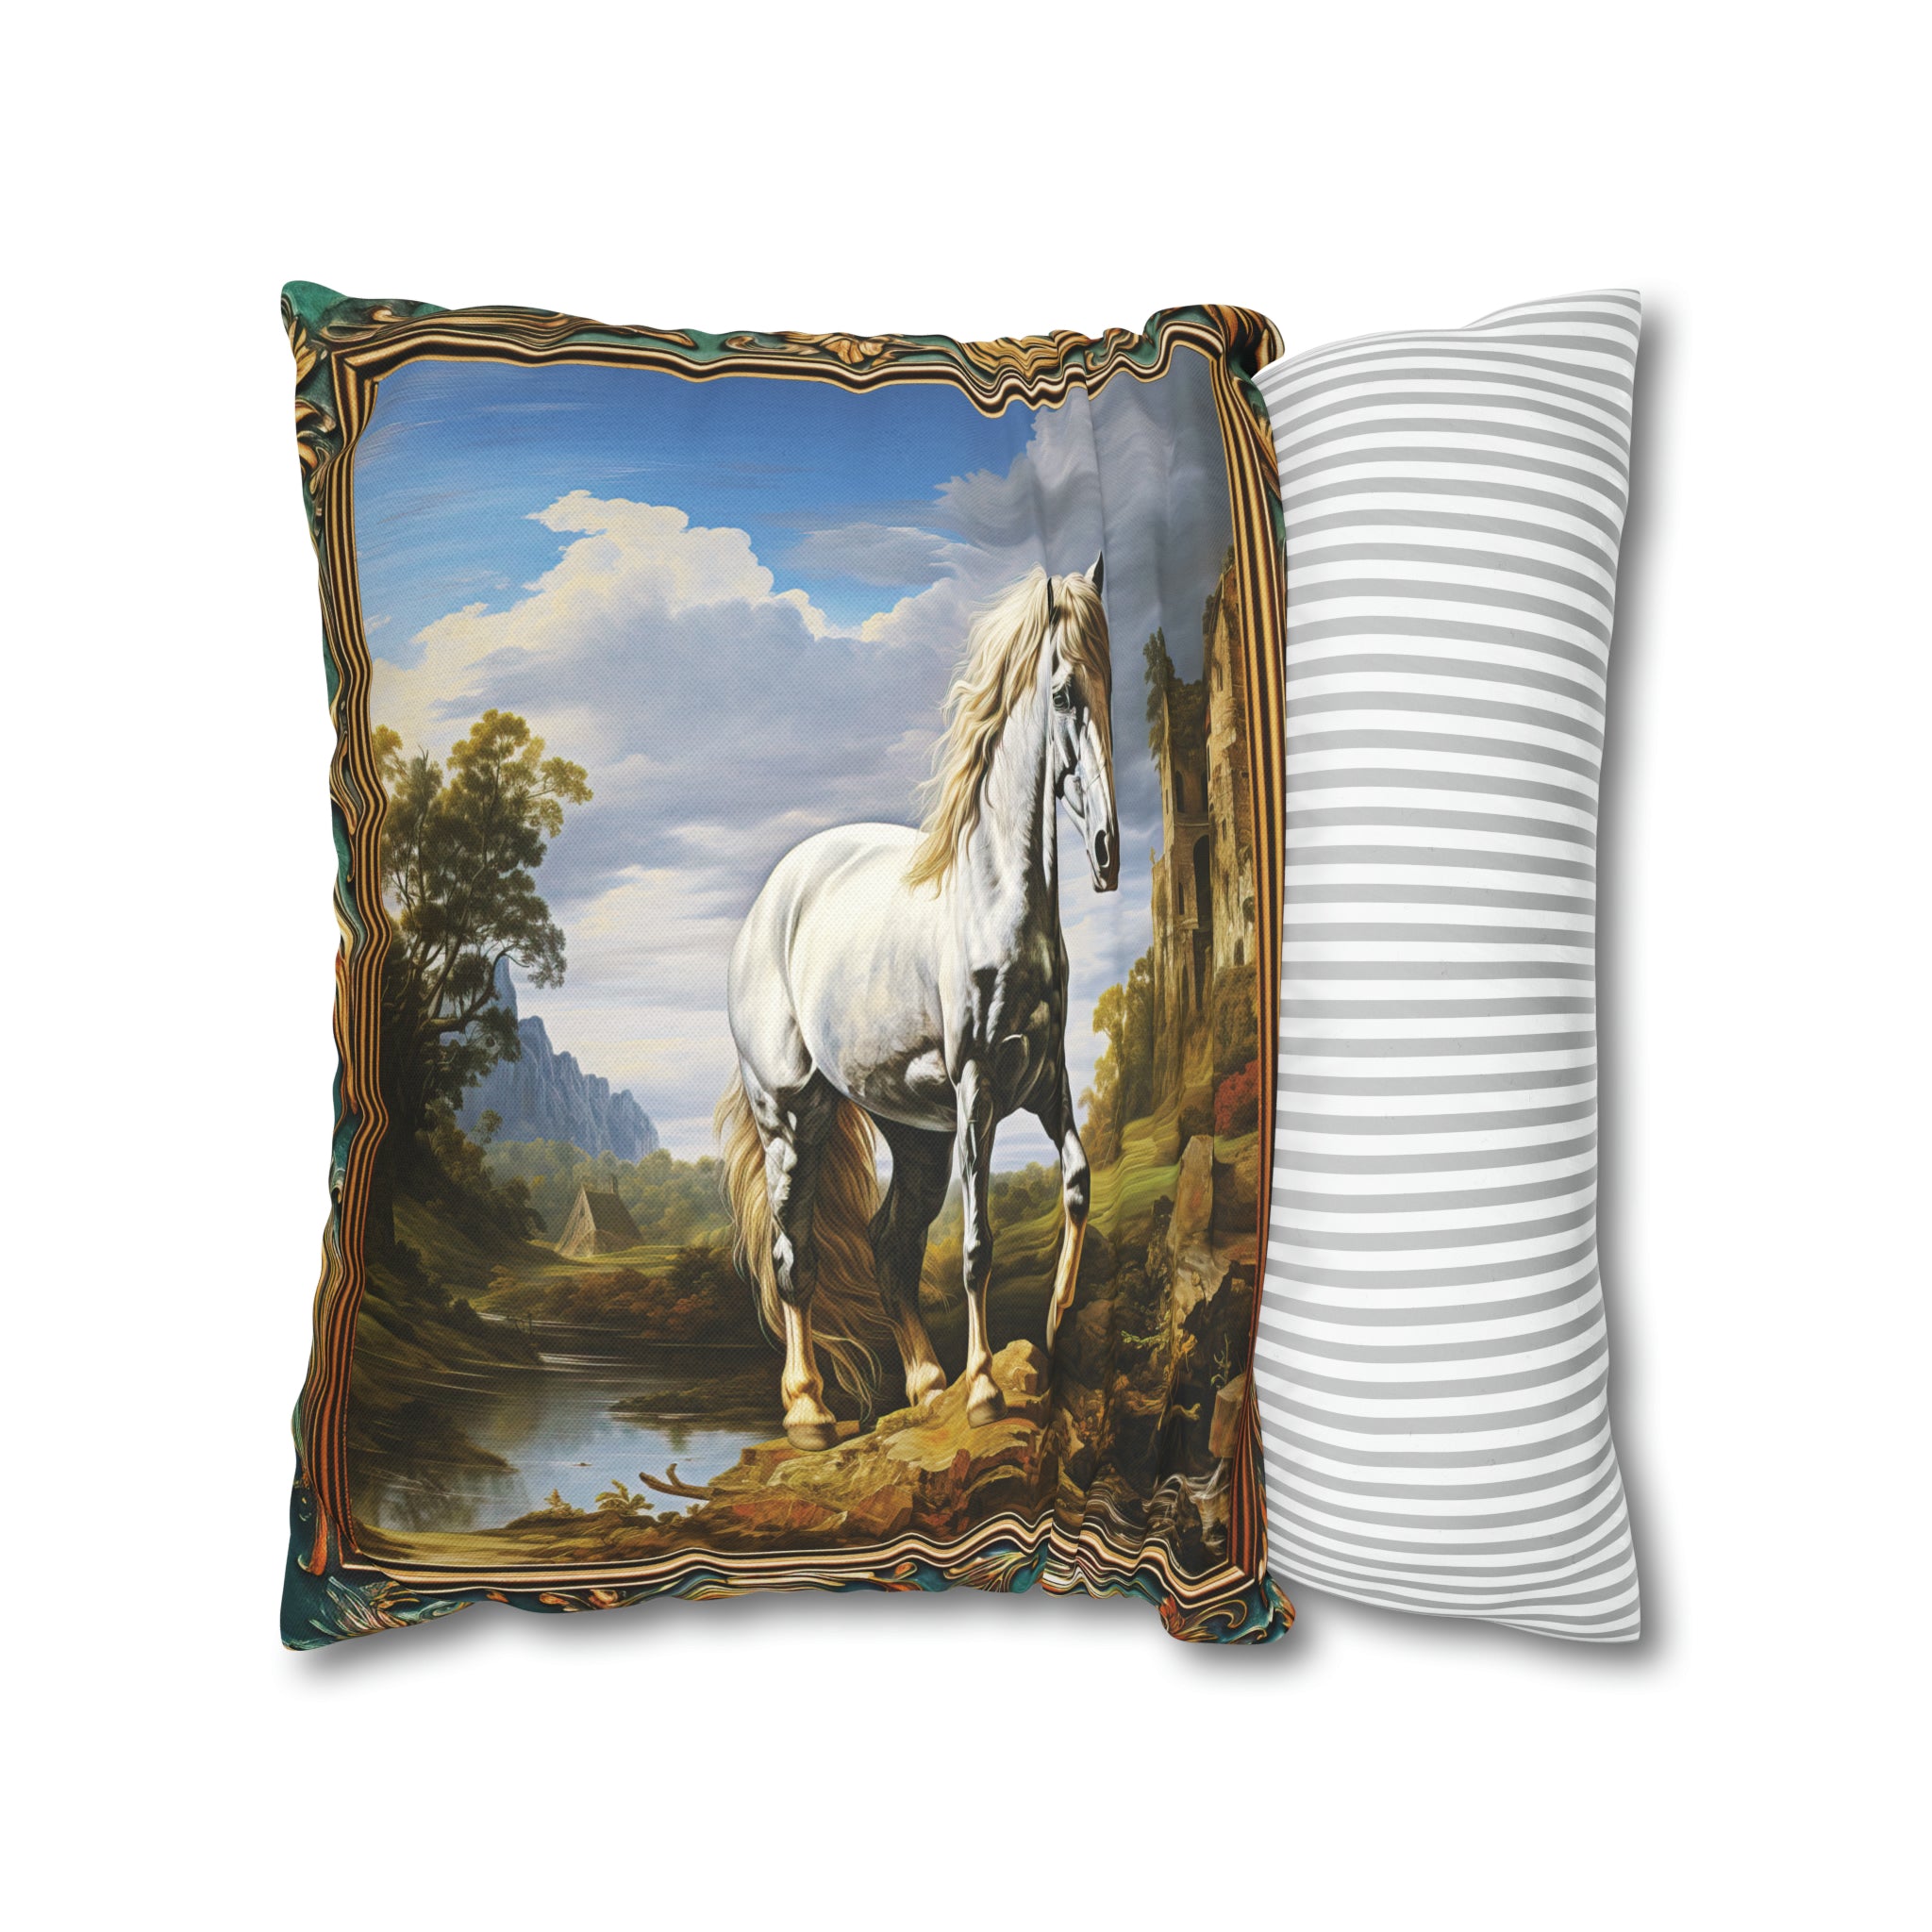 Square Pillow Case 18" x 18", CASE ONLY, no pillow form, original Art ,Colorful, Beautiful White Stallion with a Castle and Mountains